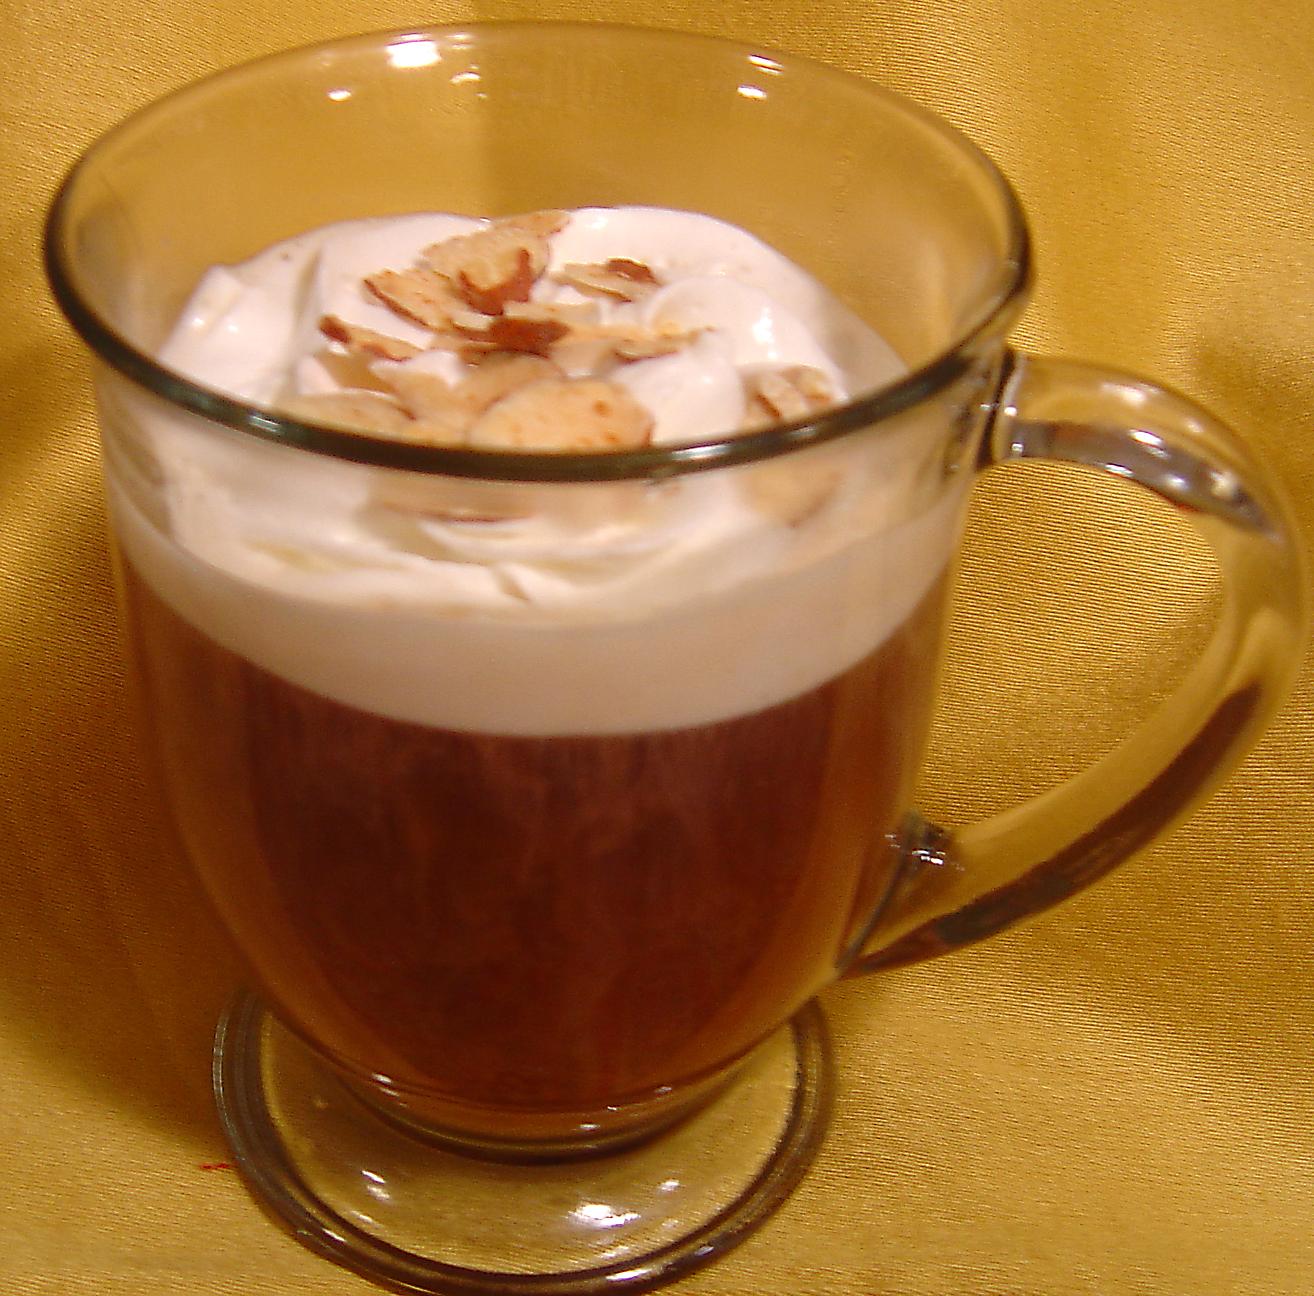  Enjoy a warm and cozy morning with a cup of fragrant Amaretto Coffee!